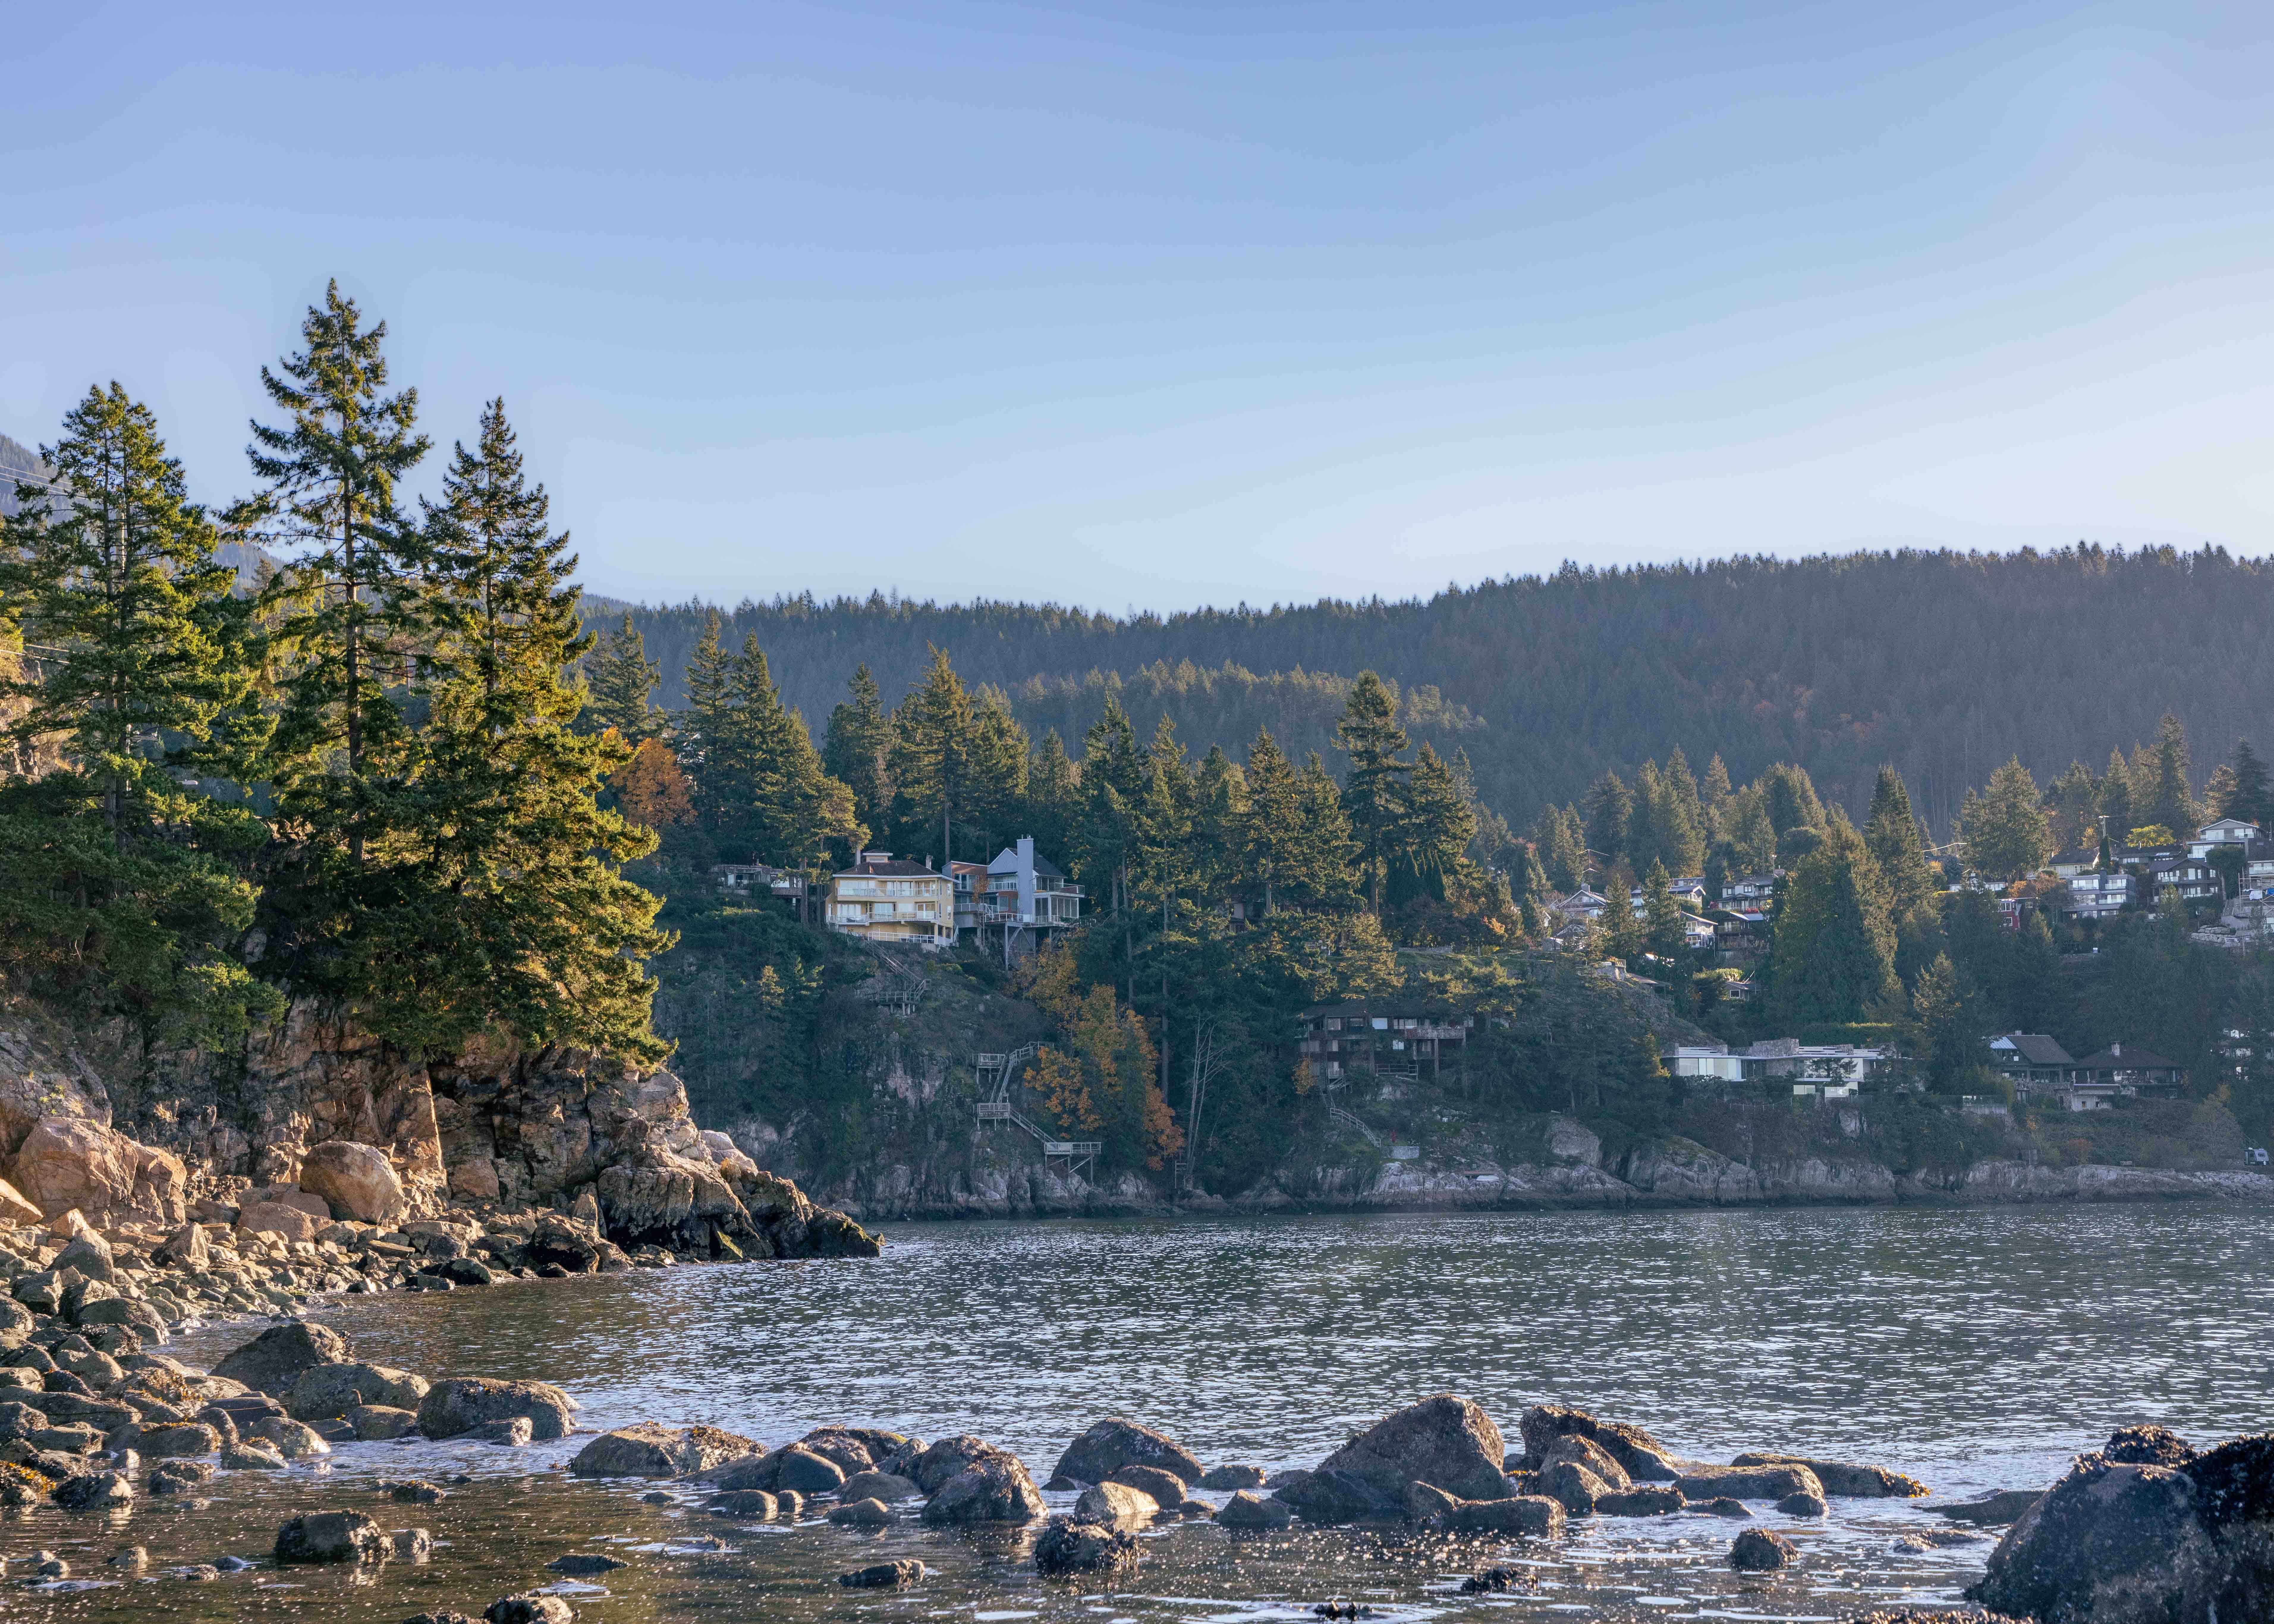 Humans greatly benefit from the ecosystem services that marine parks like Whytecliff provide. West Vancouver’s intertidal zones alone provide an estimated $549 million worth of ecosystem services annually.